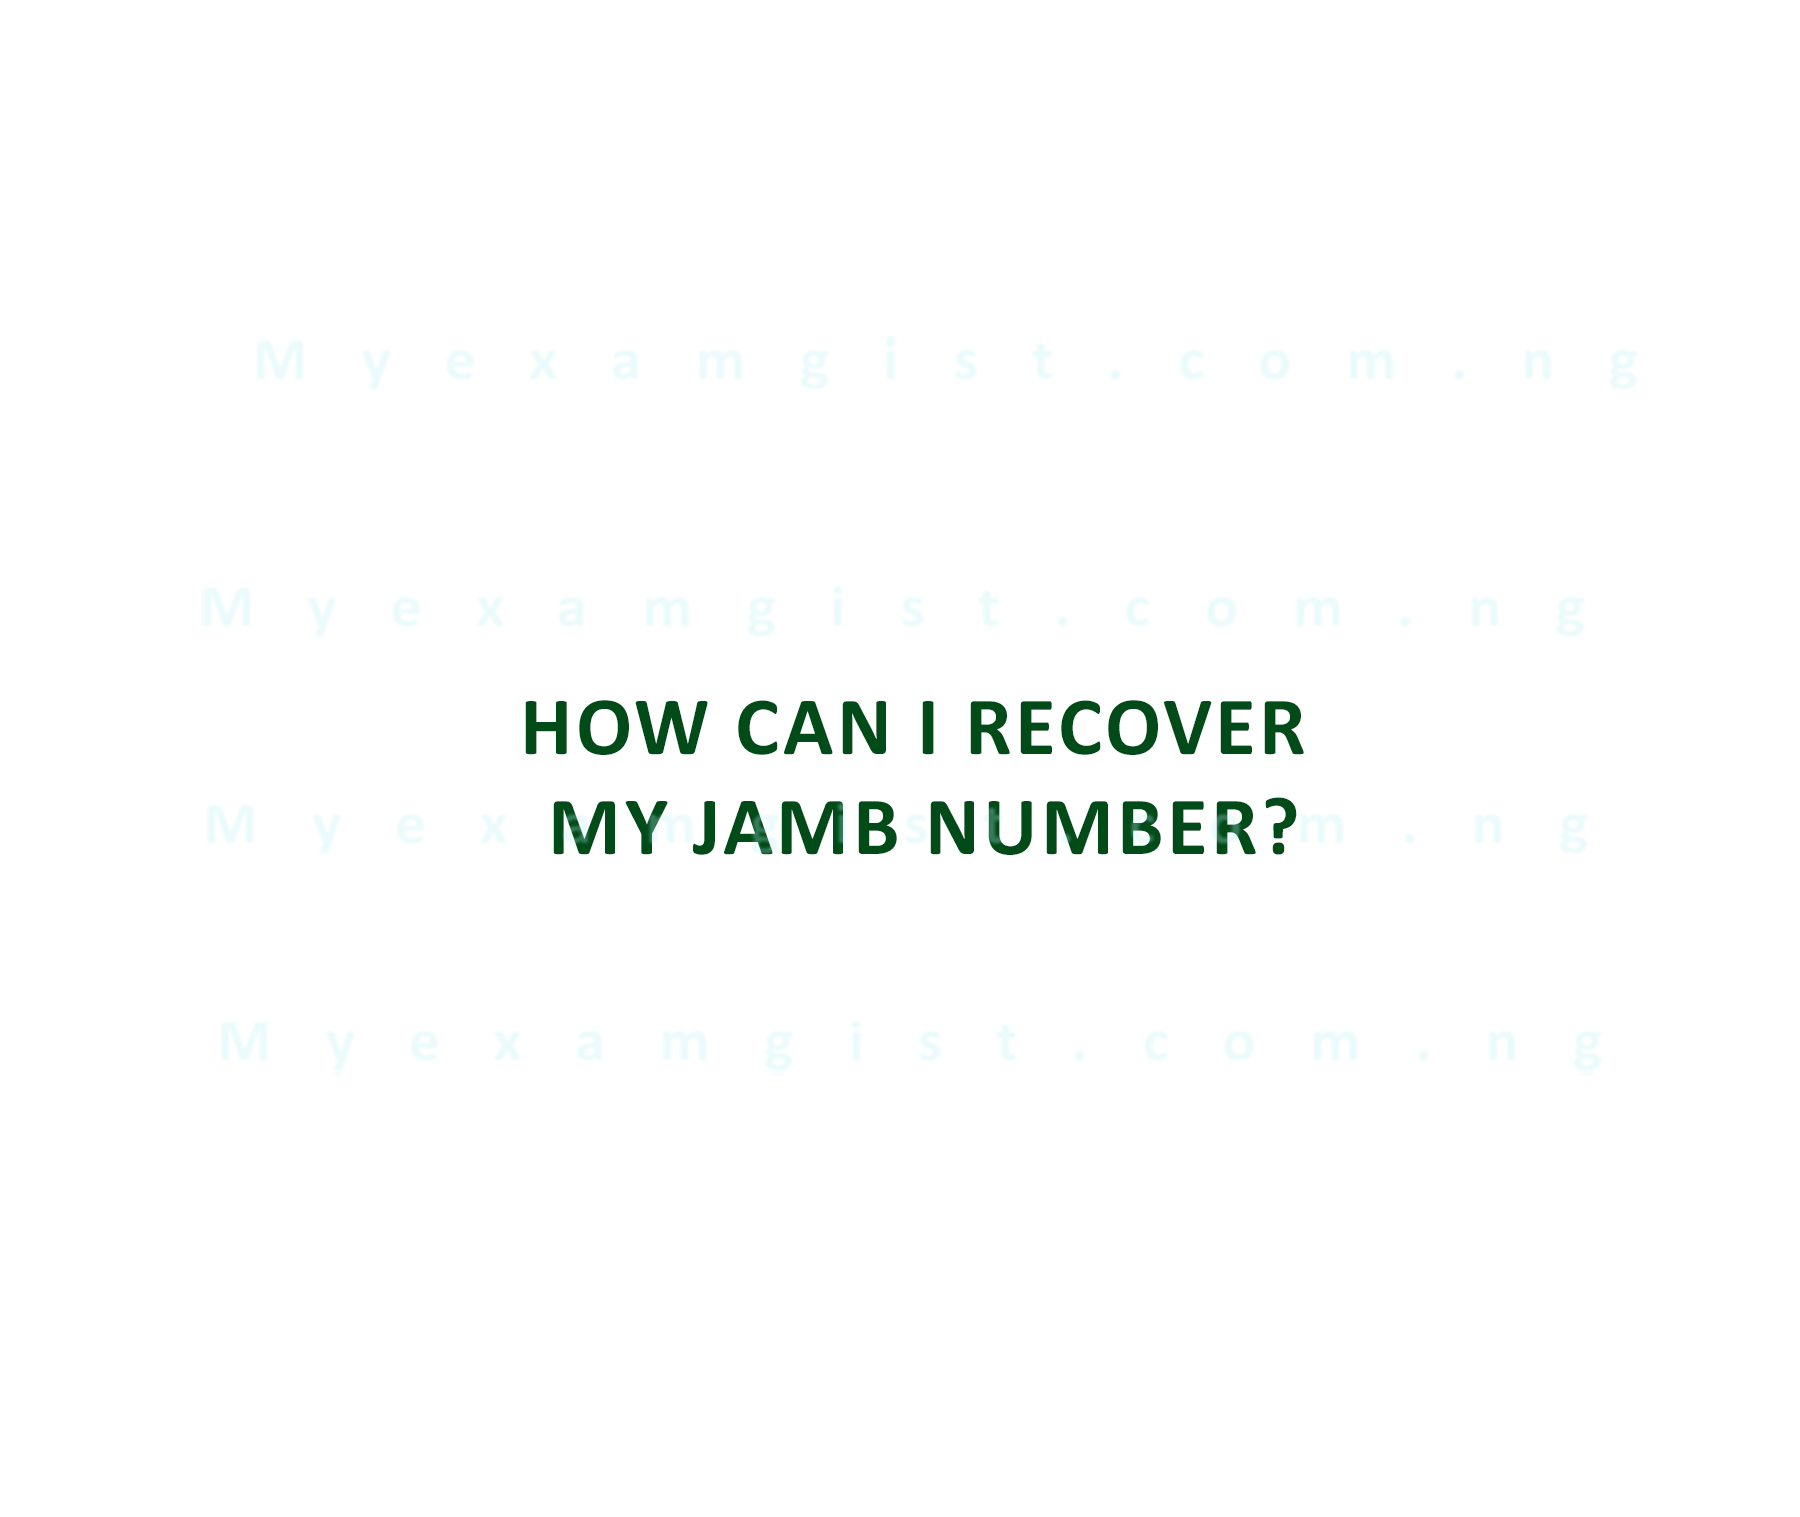 How can I recover my JAMB number?